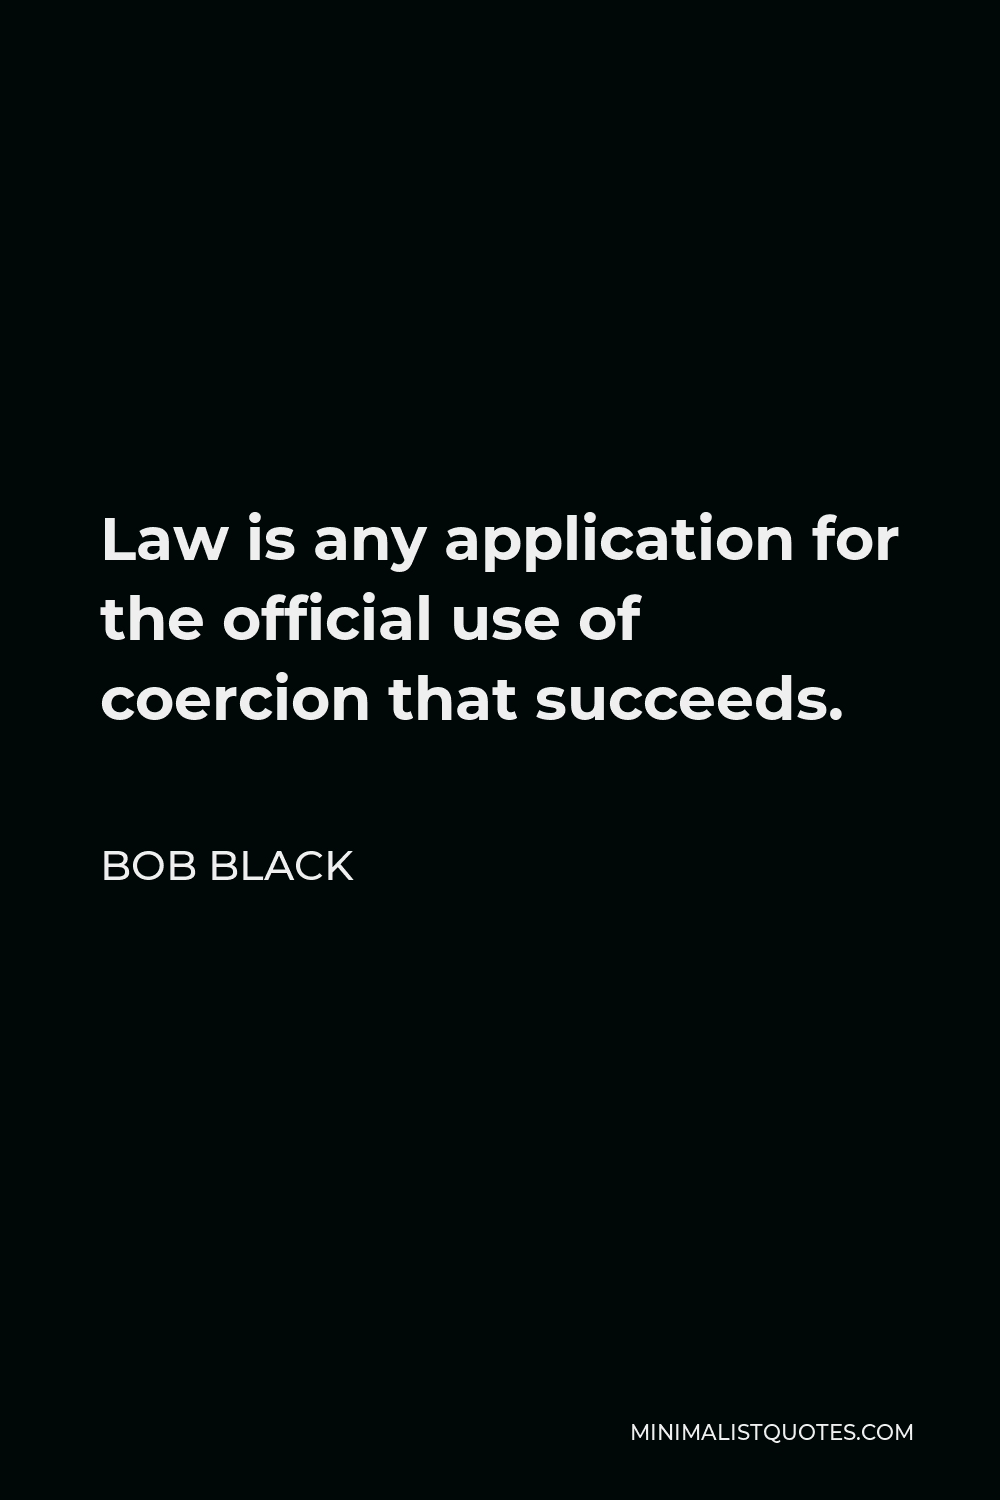 Bob Black Quote - Law is any application for the official use of coercion that succeeds.